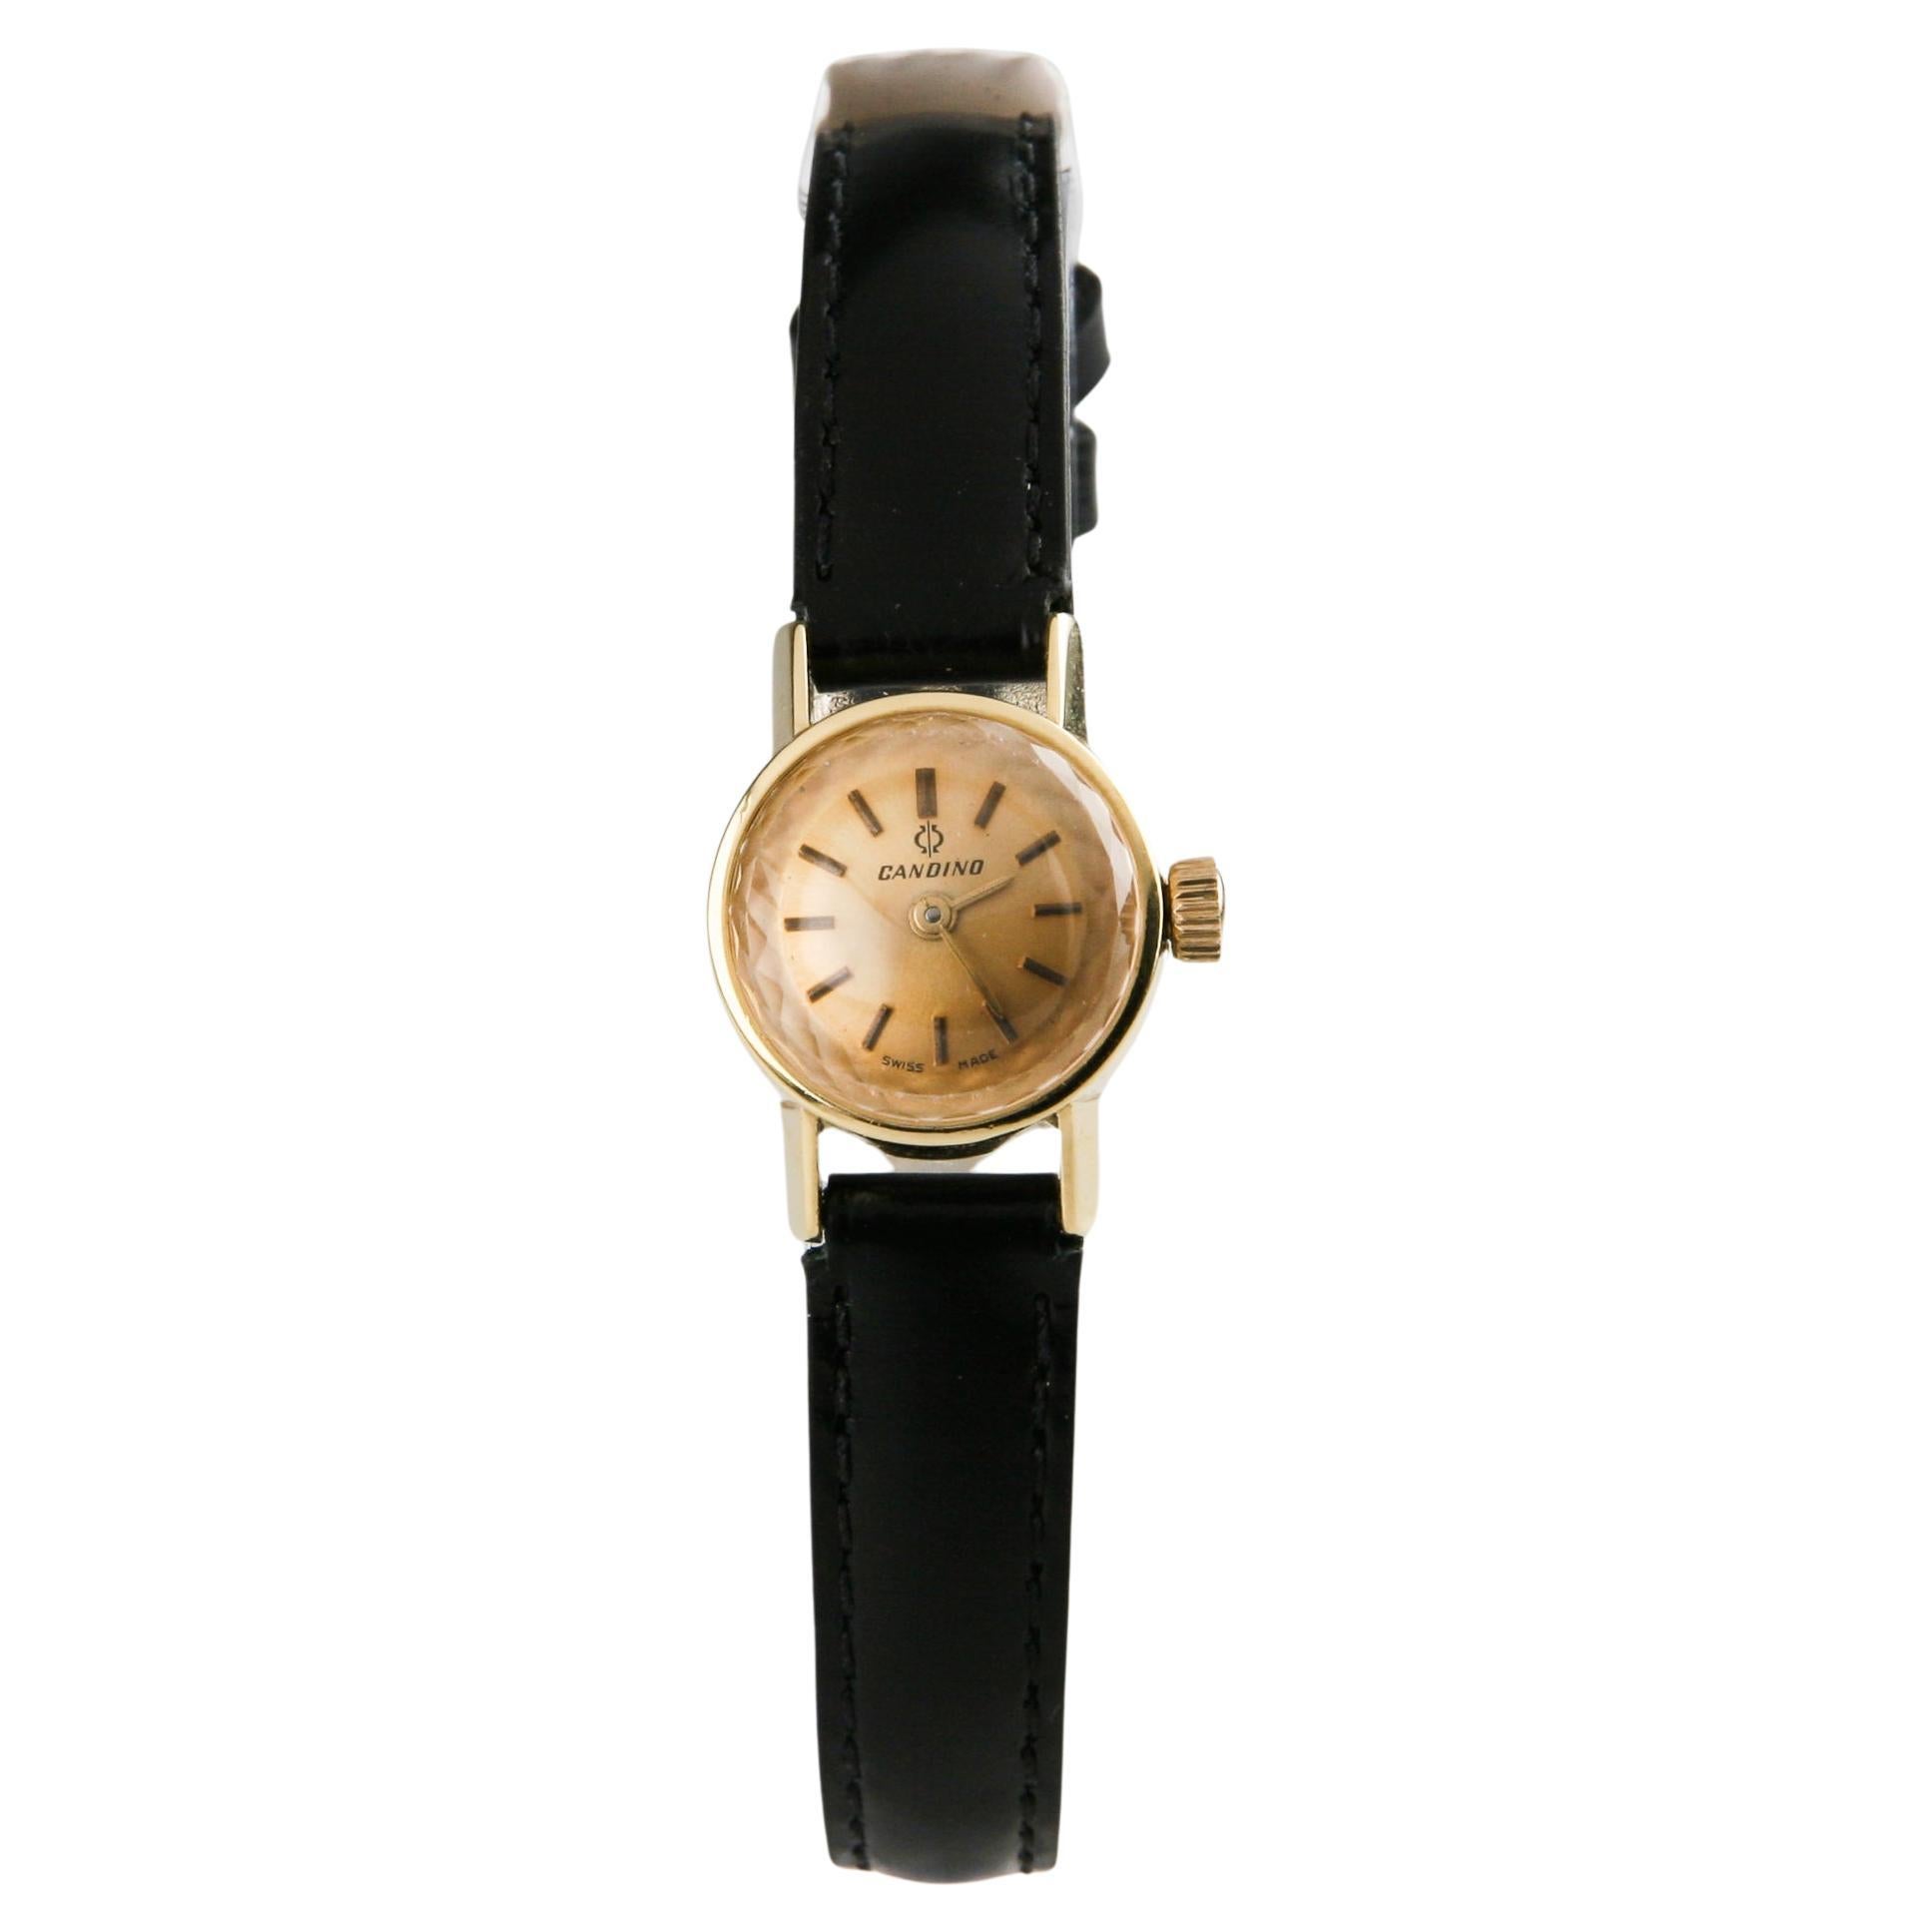 18k Yellow Gold Candino Women's Vintage Hand-Winding Watch w/ Black Leather Band For Sale